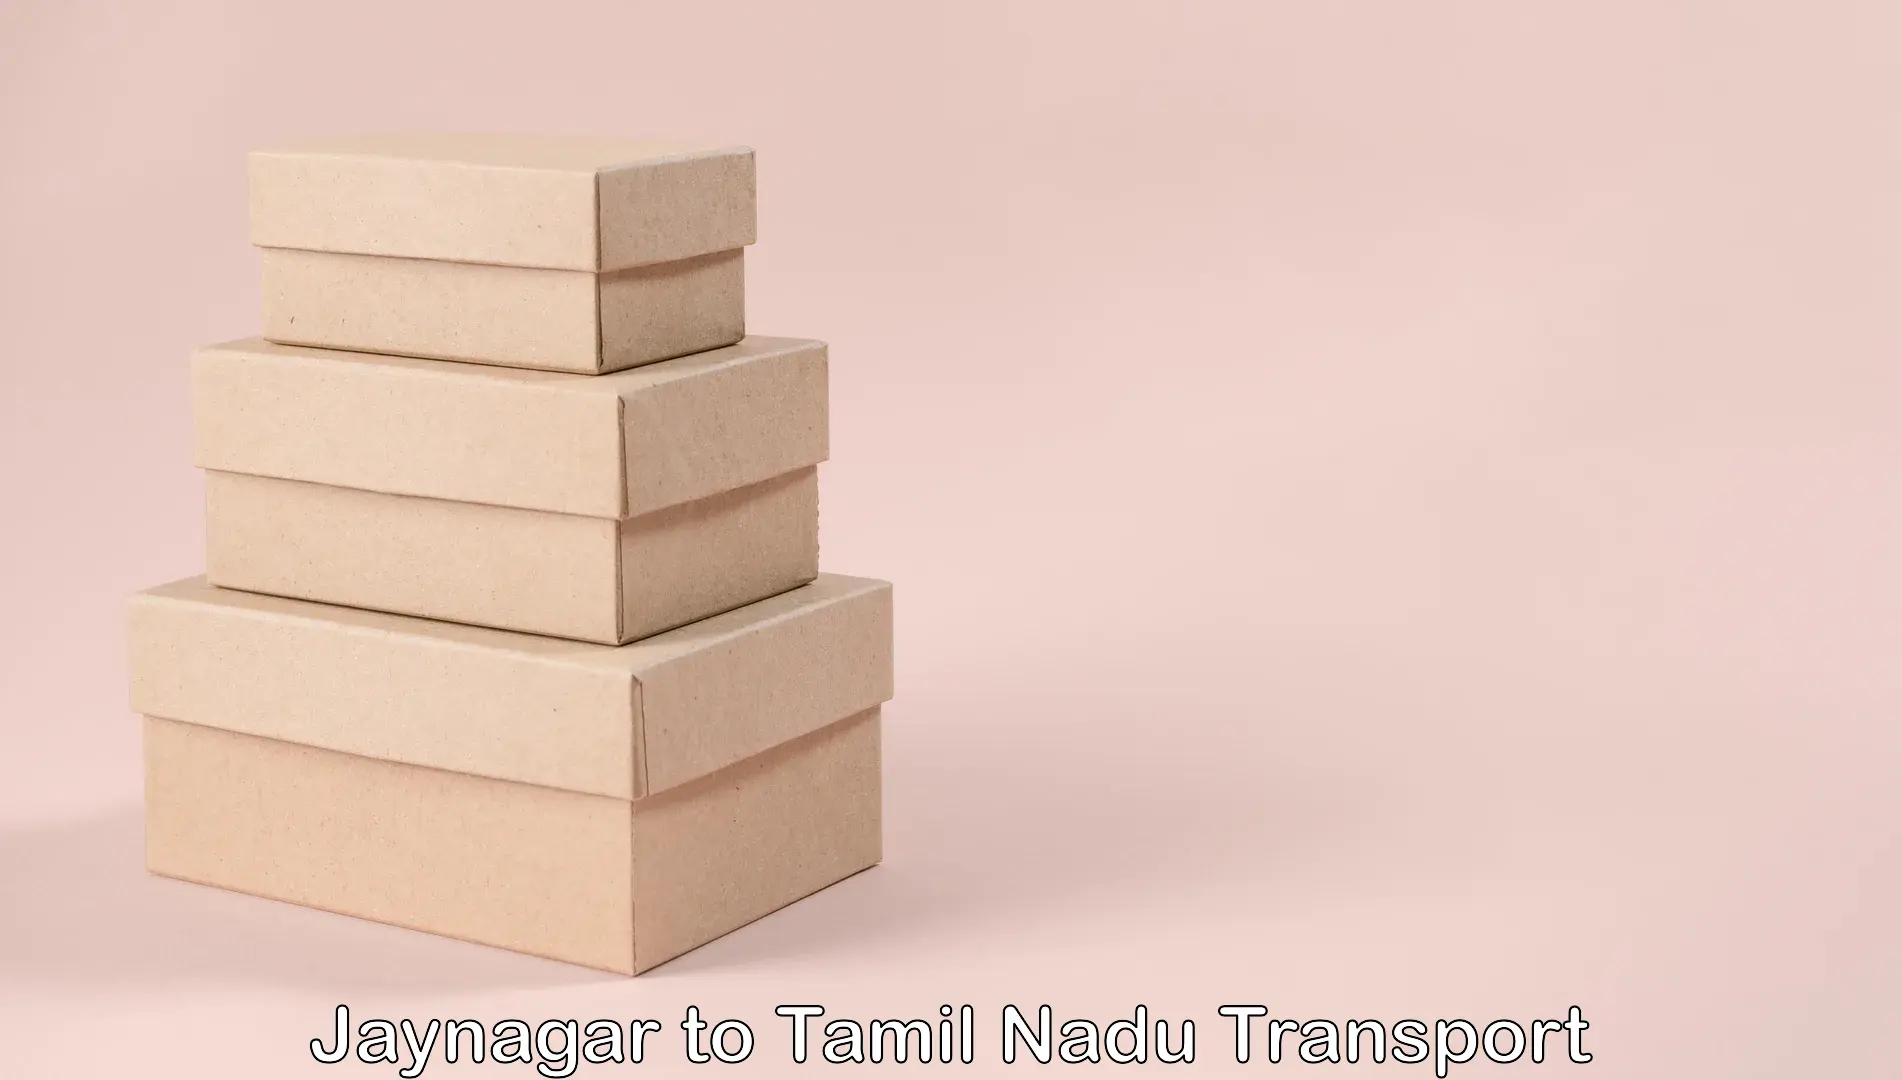 Furniture transport service Jaynagar to SRM Institute of Science and Technology Chennai